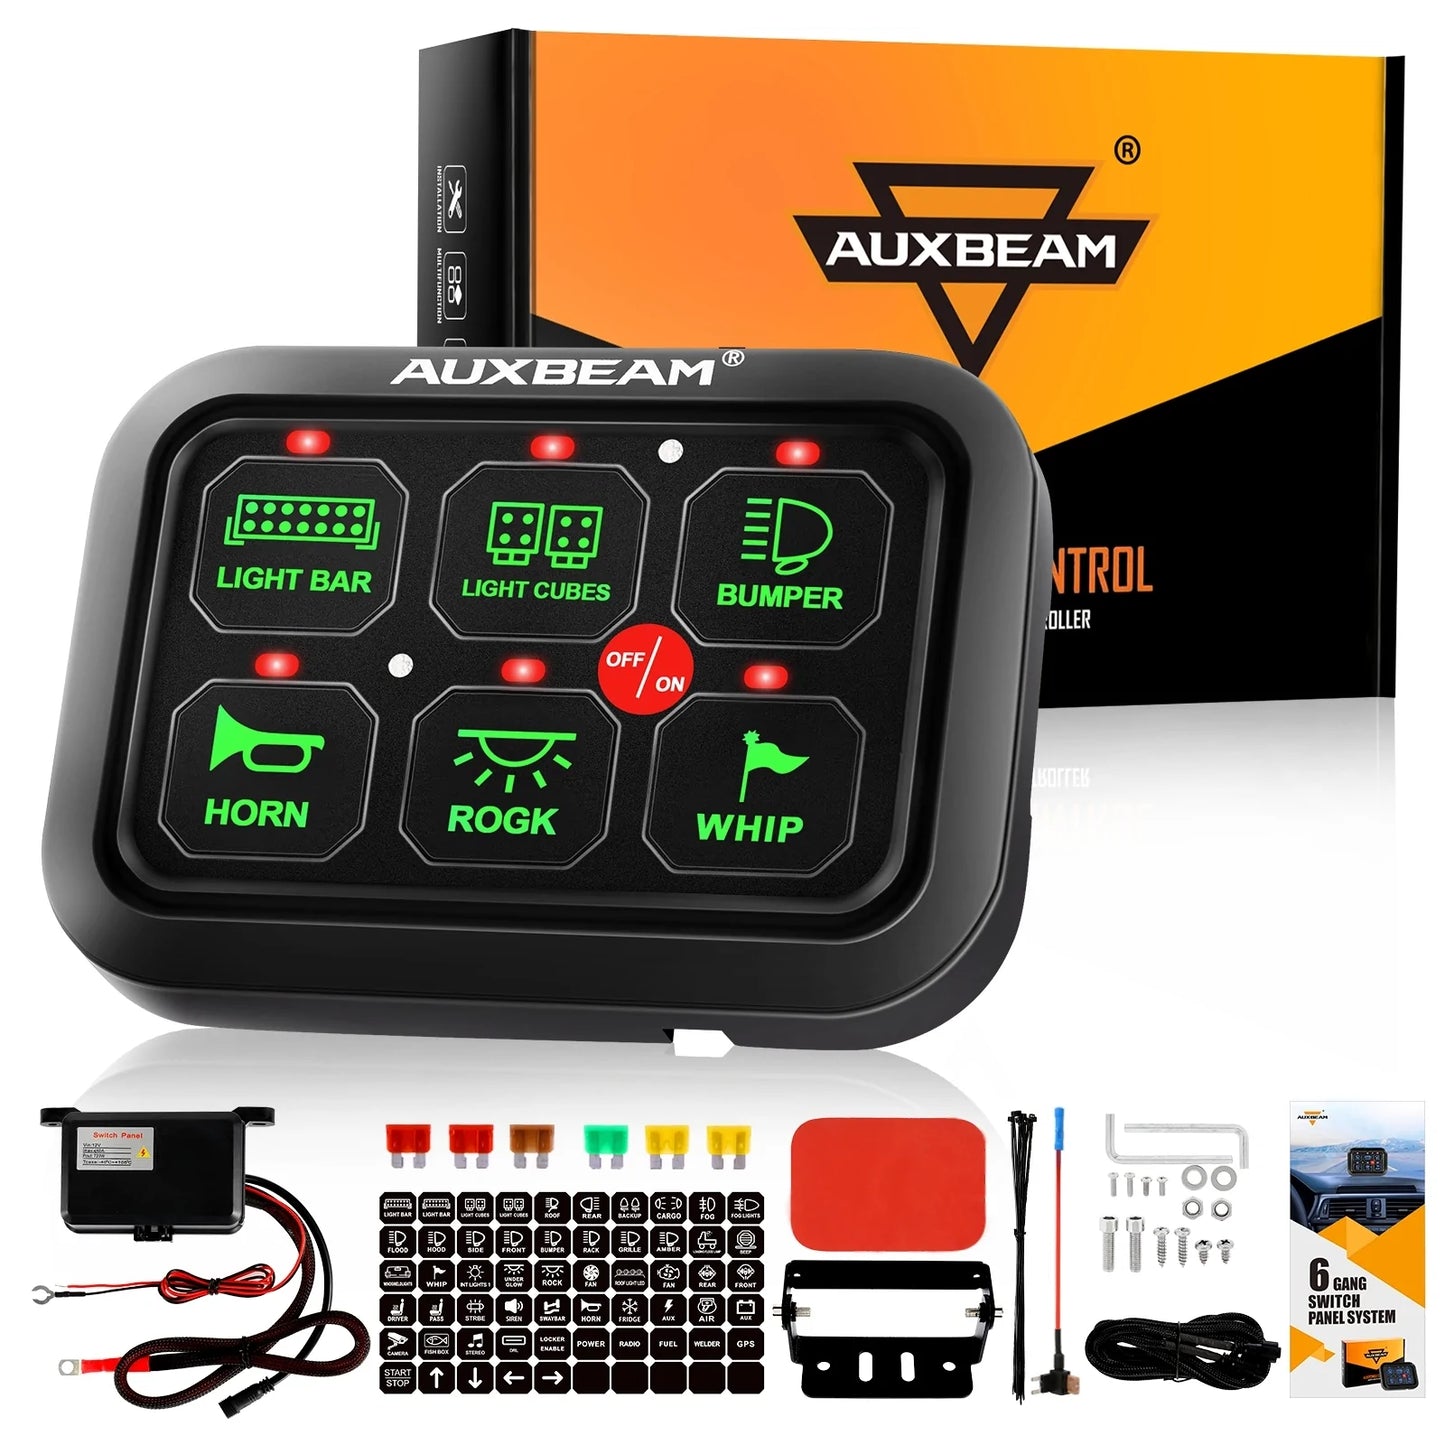 Auxbeam BC60 6 gang multifunction switch panel (blue or green)